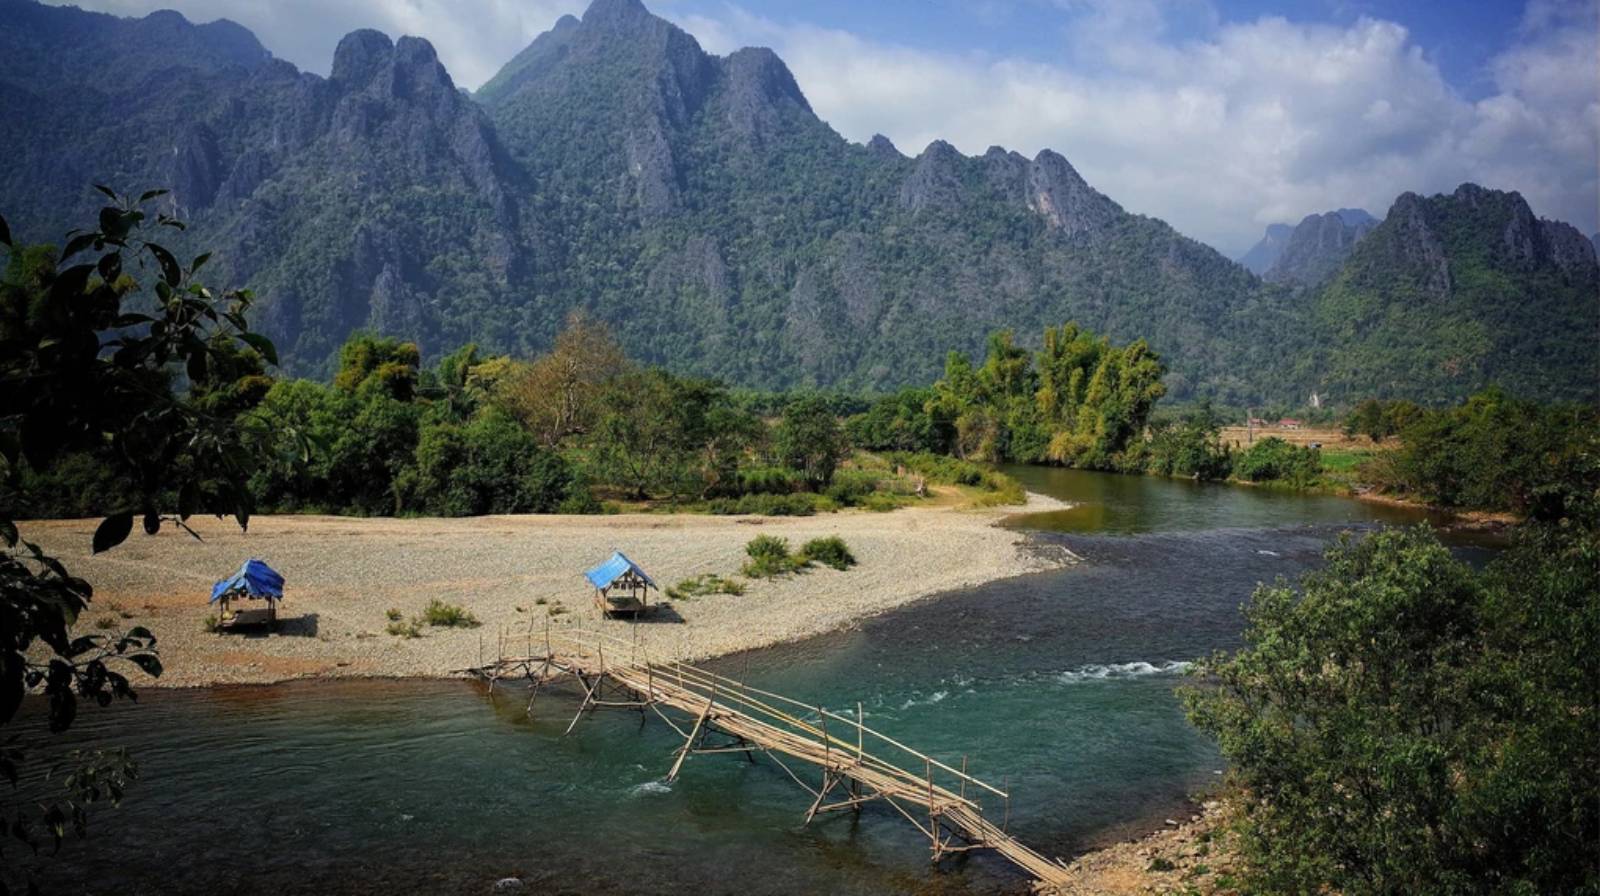 The Top 10 Things To Do in Vang Vieng, Laos